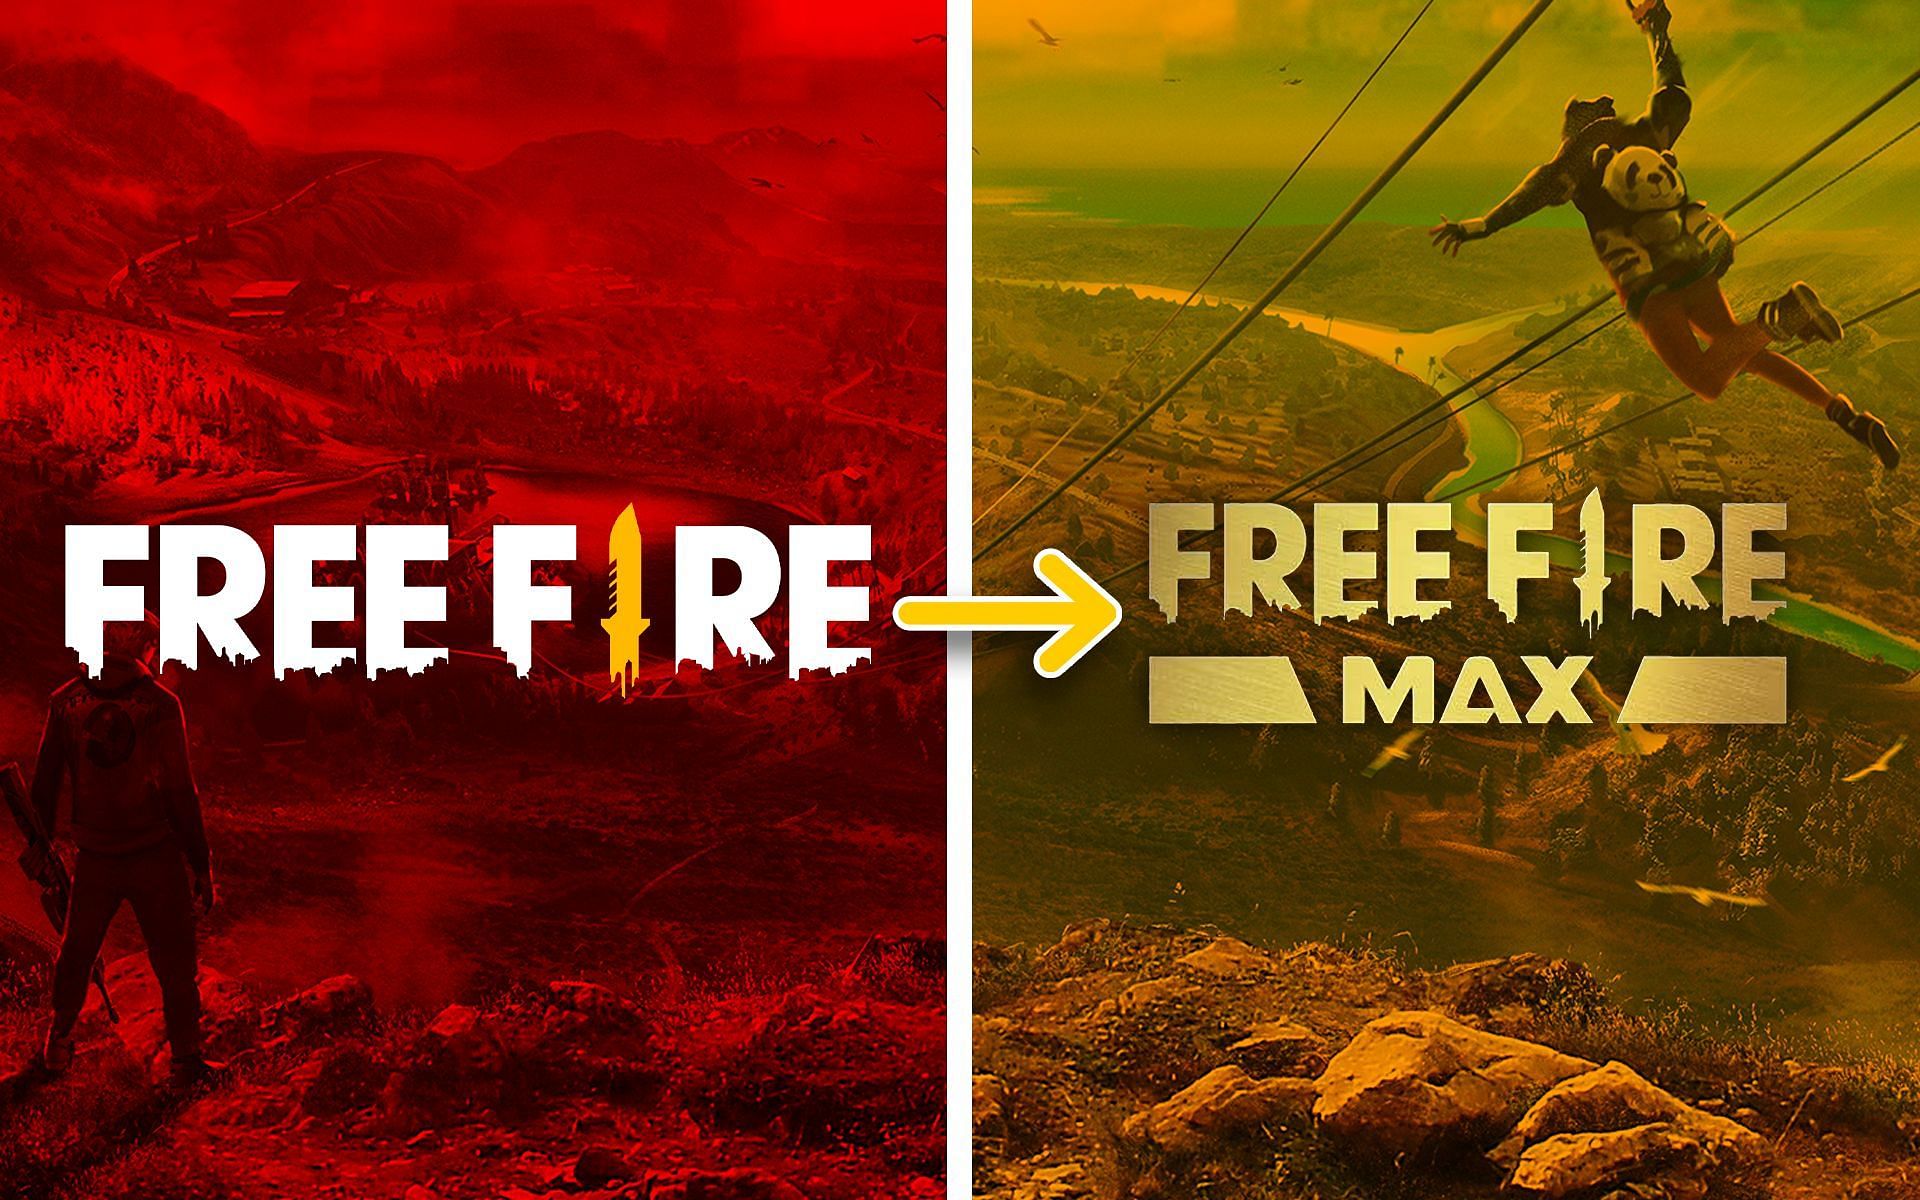 Many players are switching over to Free Fire MAX since it is legal (Image via Sportskeeda)